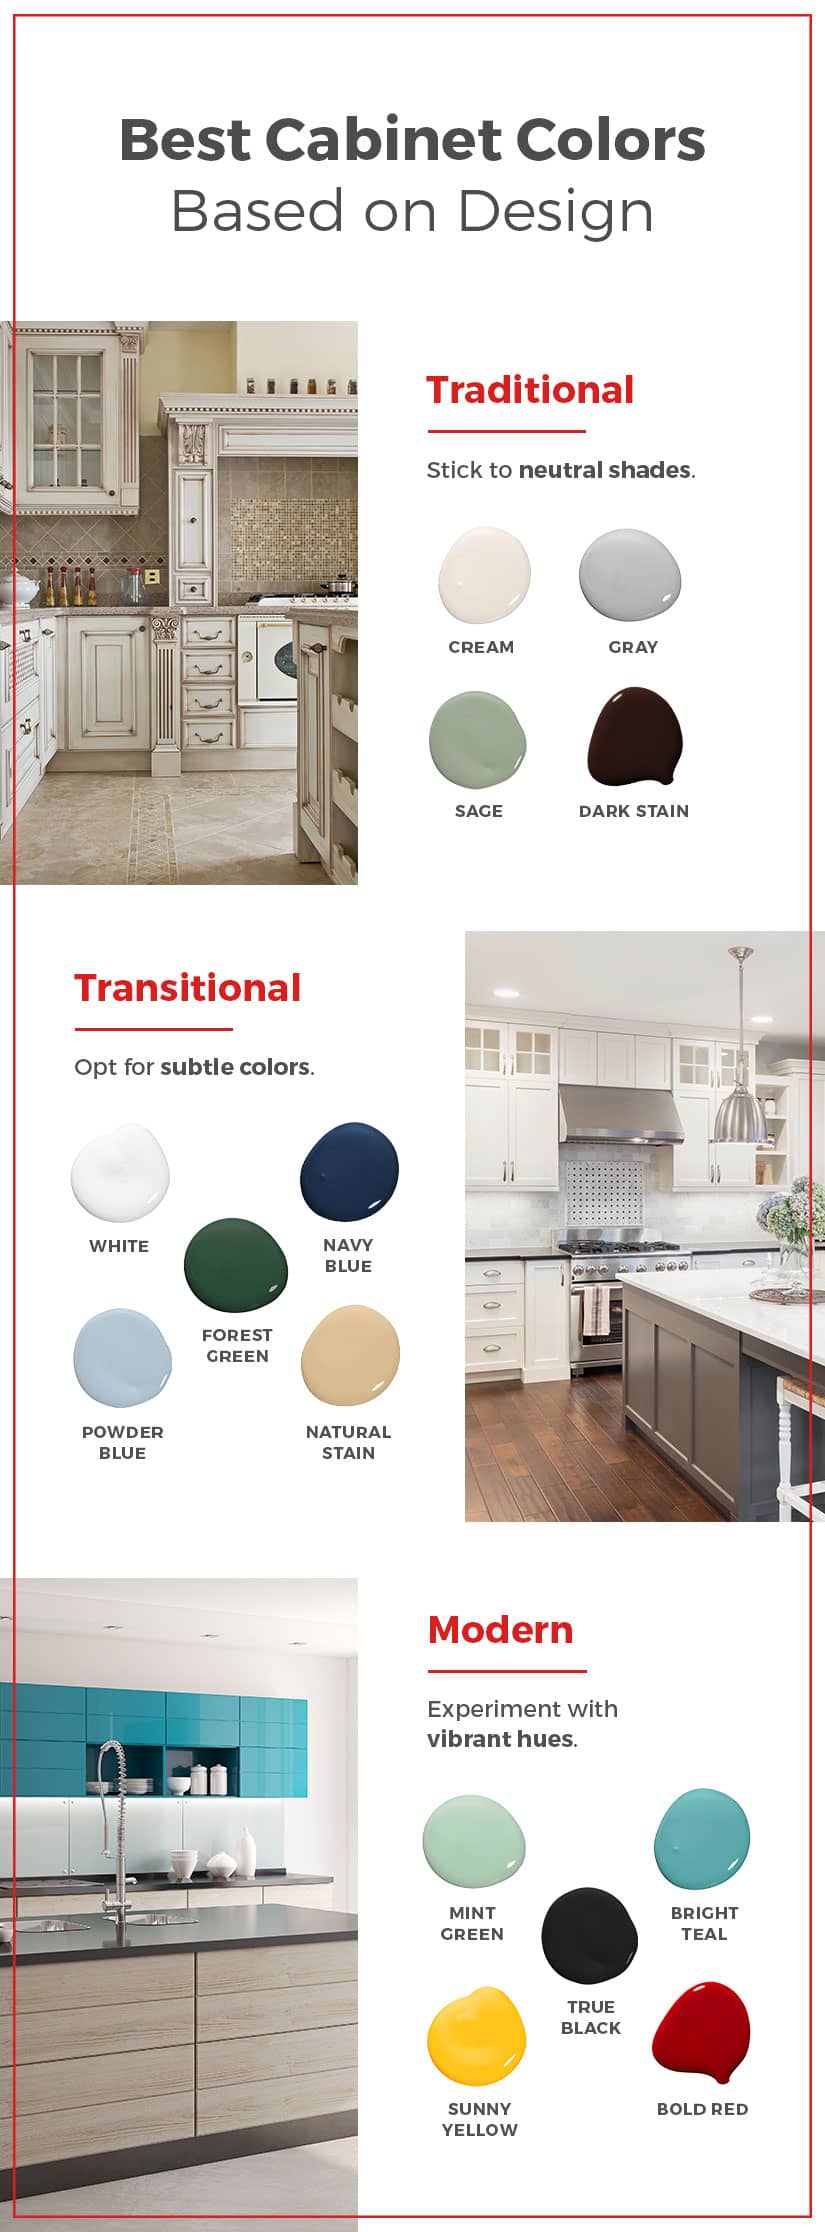 The best cabinet colors for traditional, transitional, and modern kitchen designs.